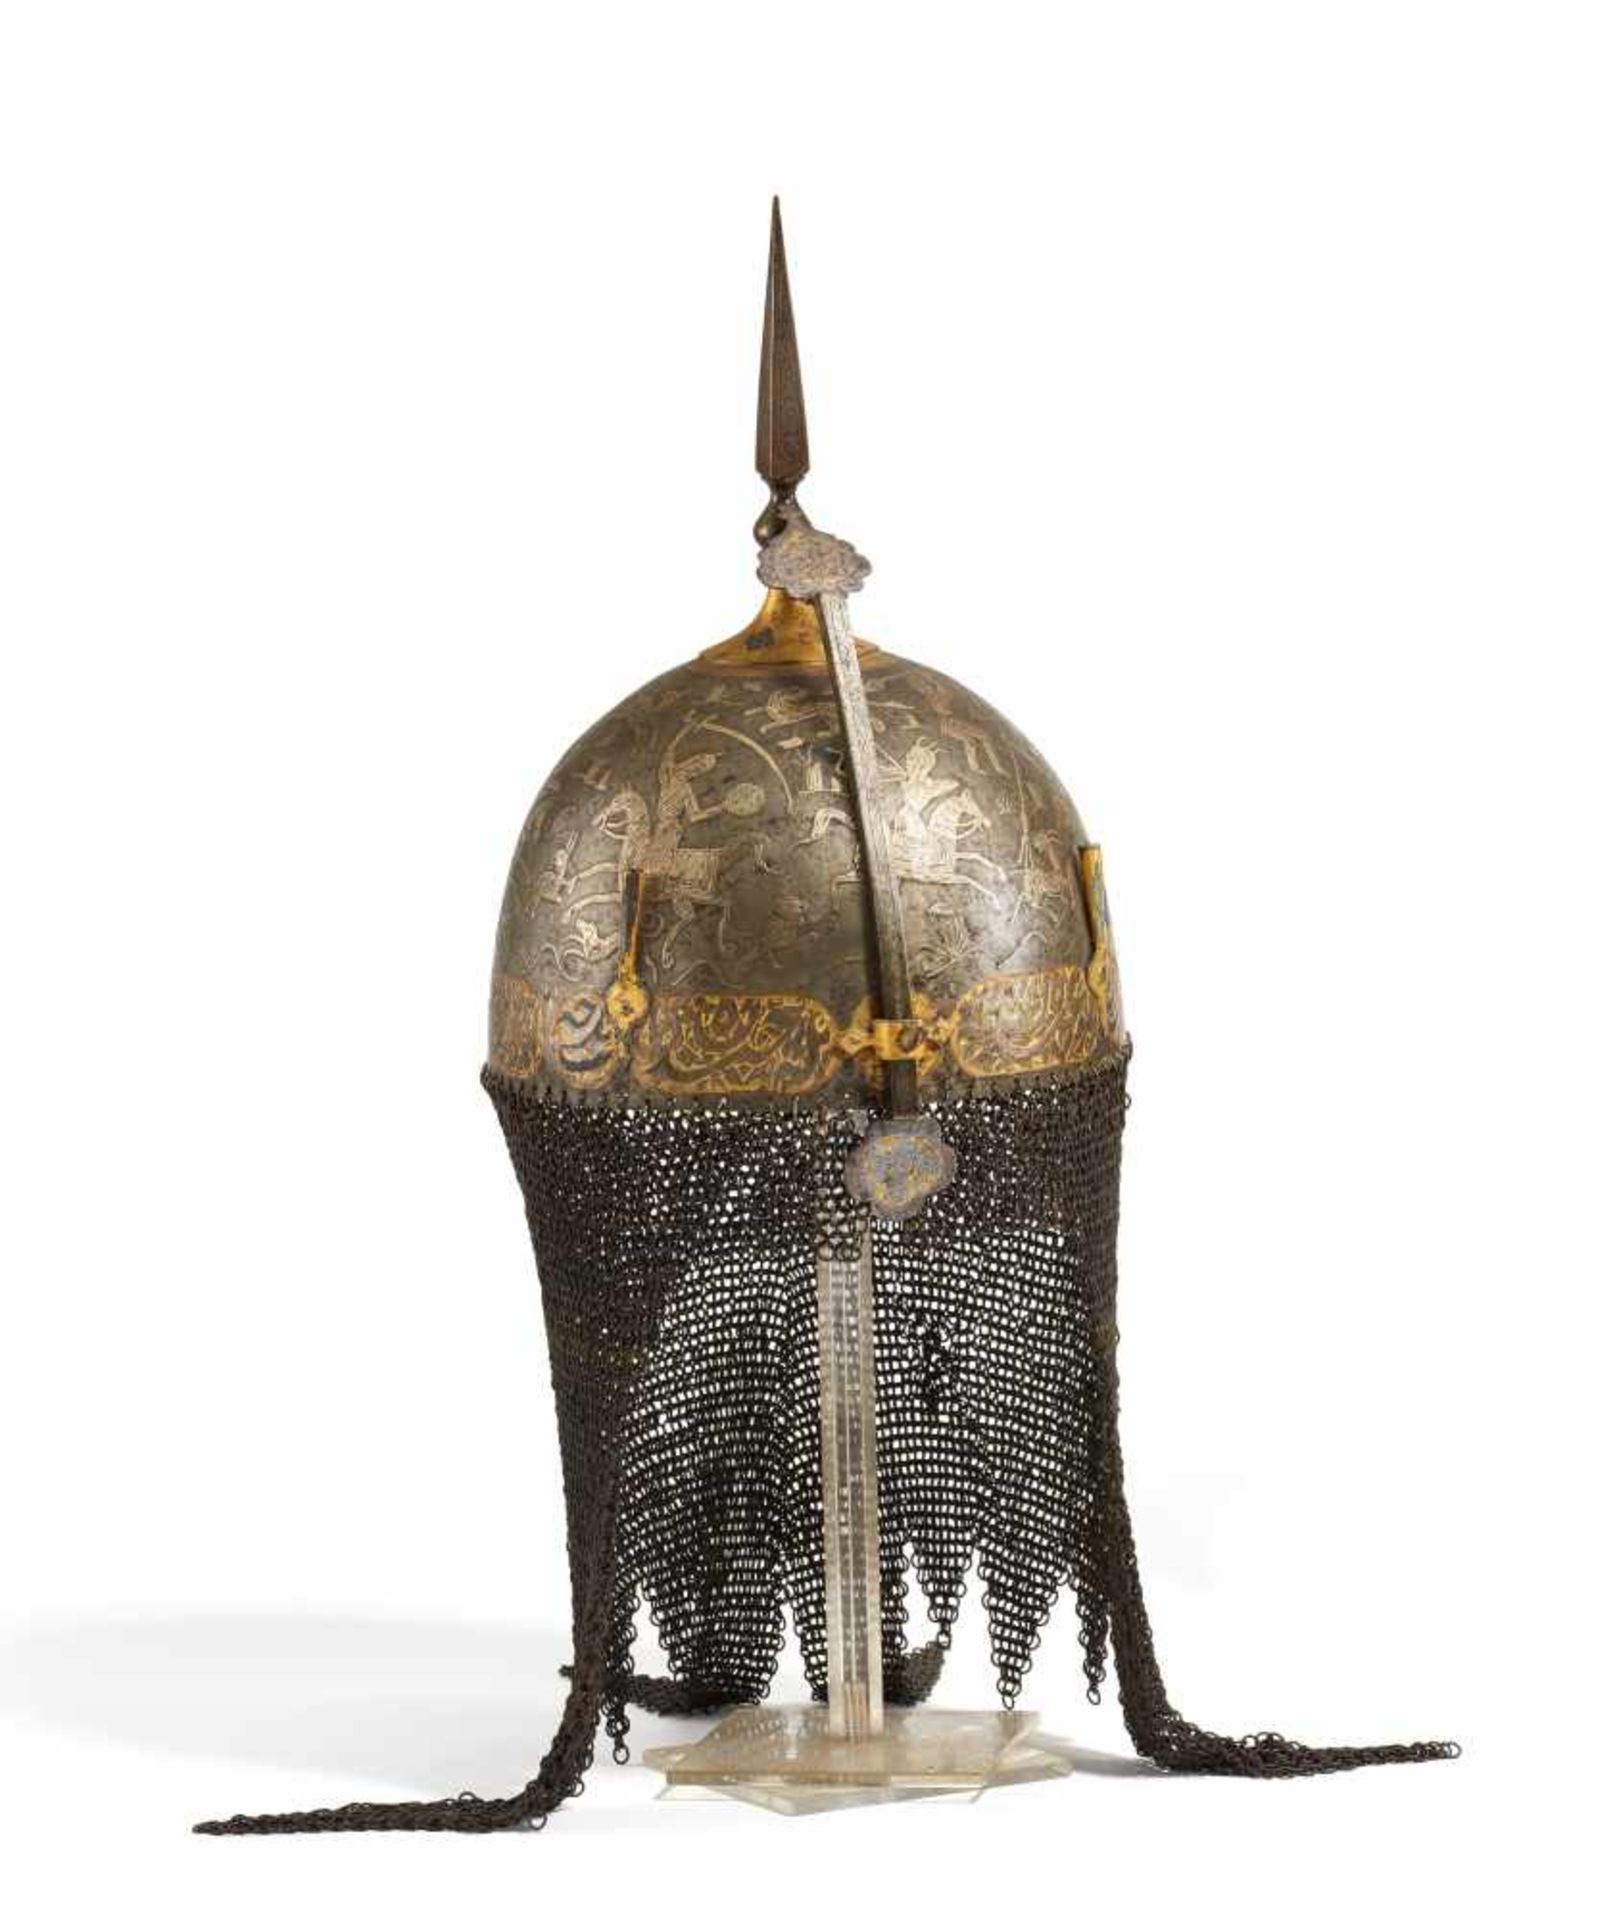 IMPORTANT HELMET (KULAH KHUD) WITH HUNTING SCENES. Mughal India/Persia. 18th c. Iron with gold and